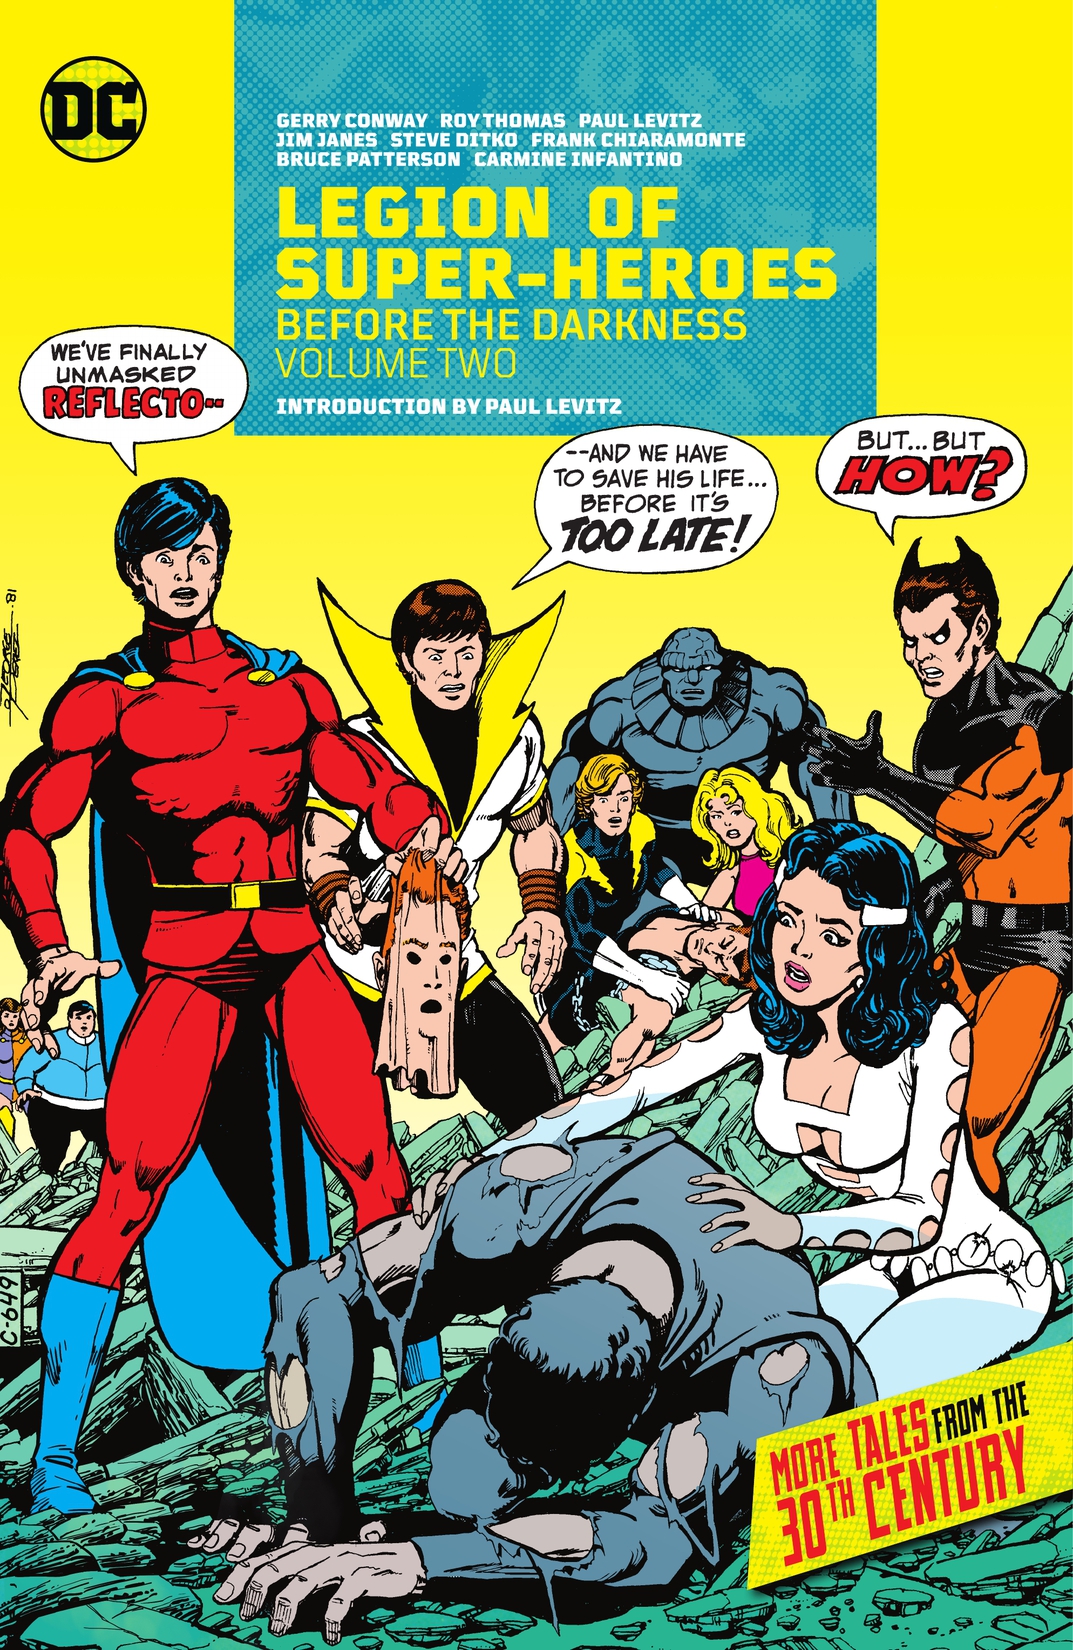 Legion of Super-Heroes: Before the Darkness Vol. 2 preview images